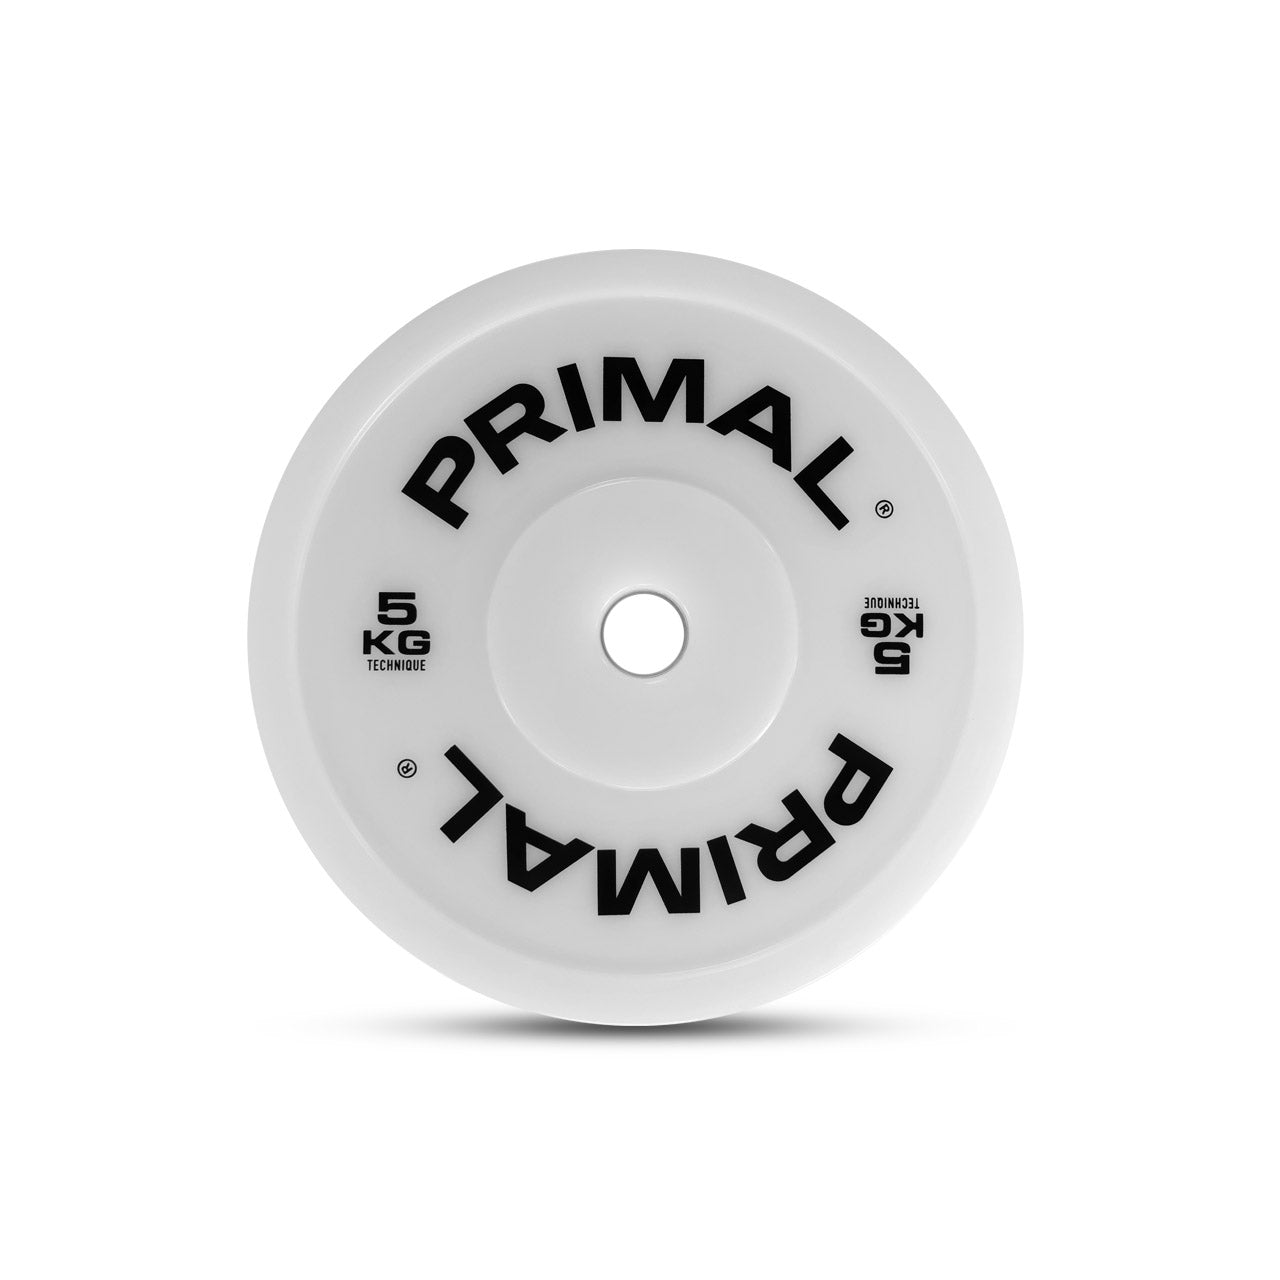 Primal Performance Series Technique Weight Plate - 5kg